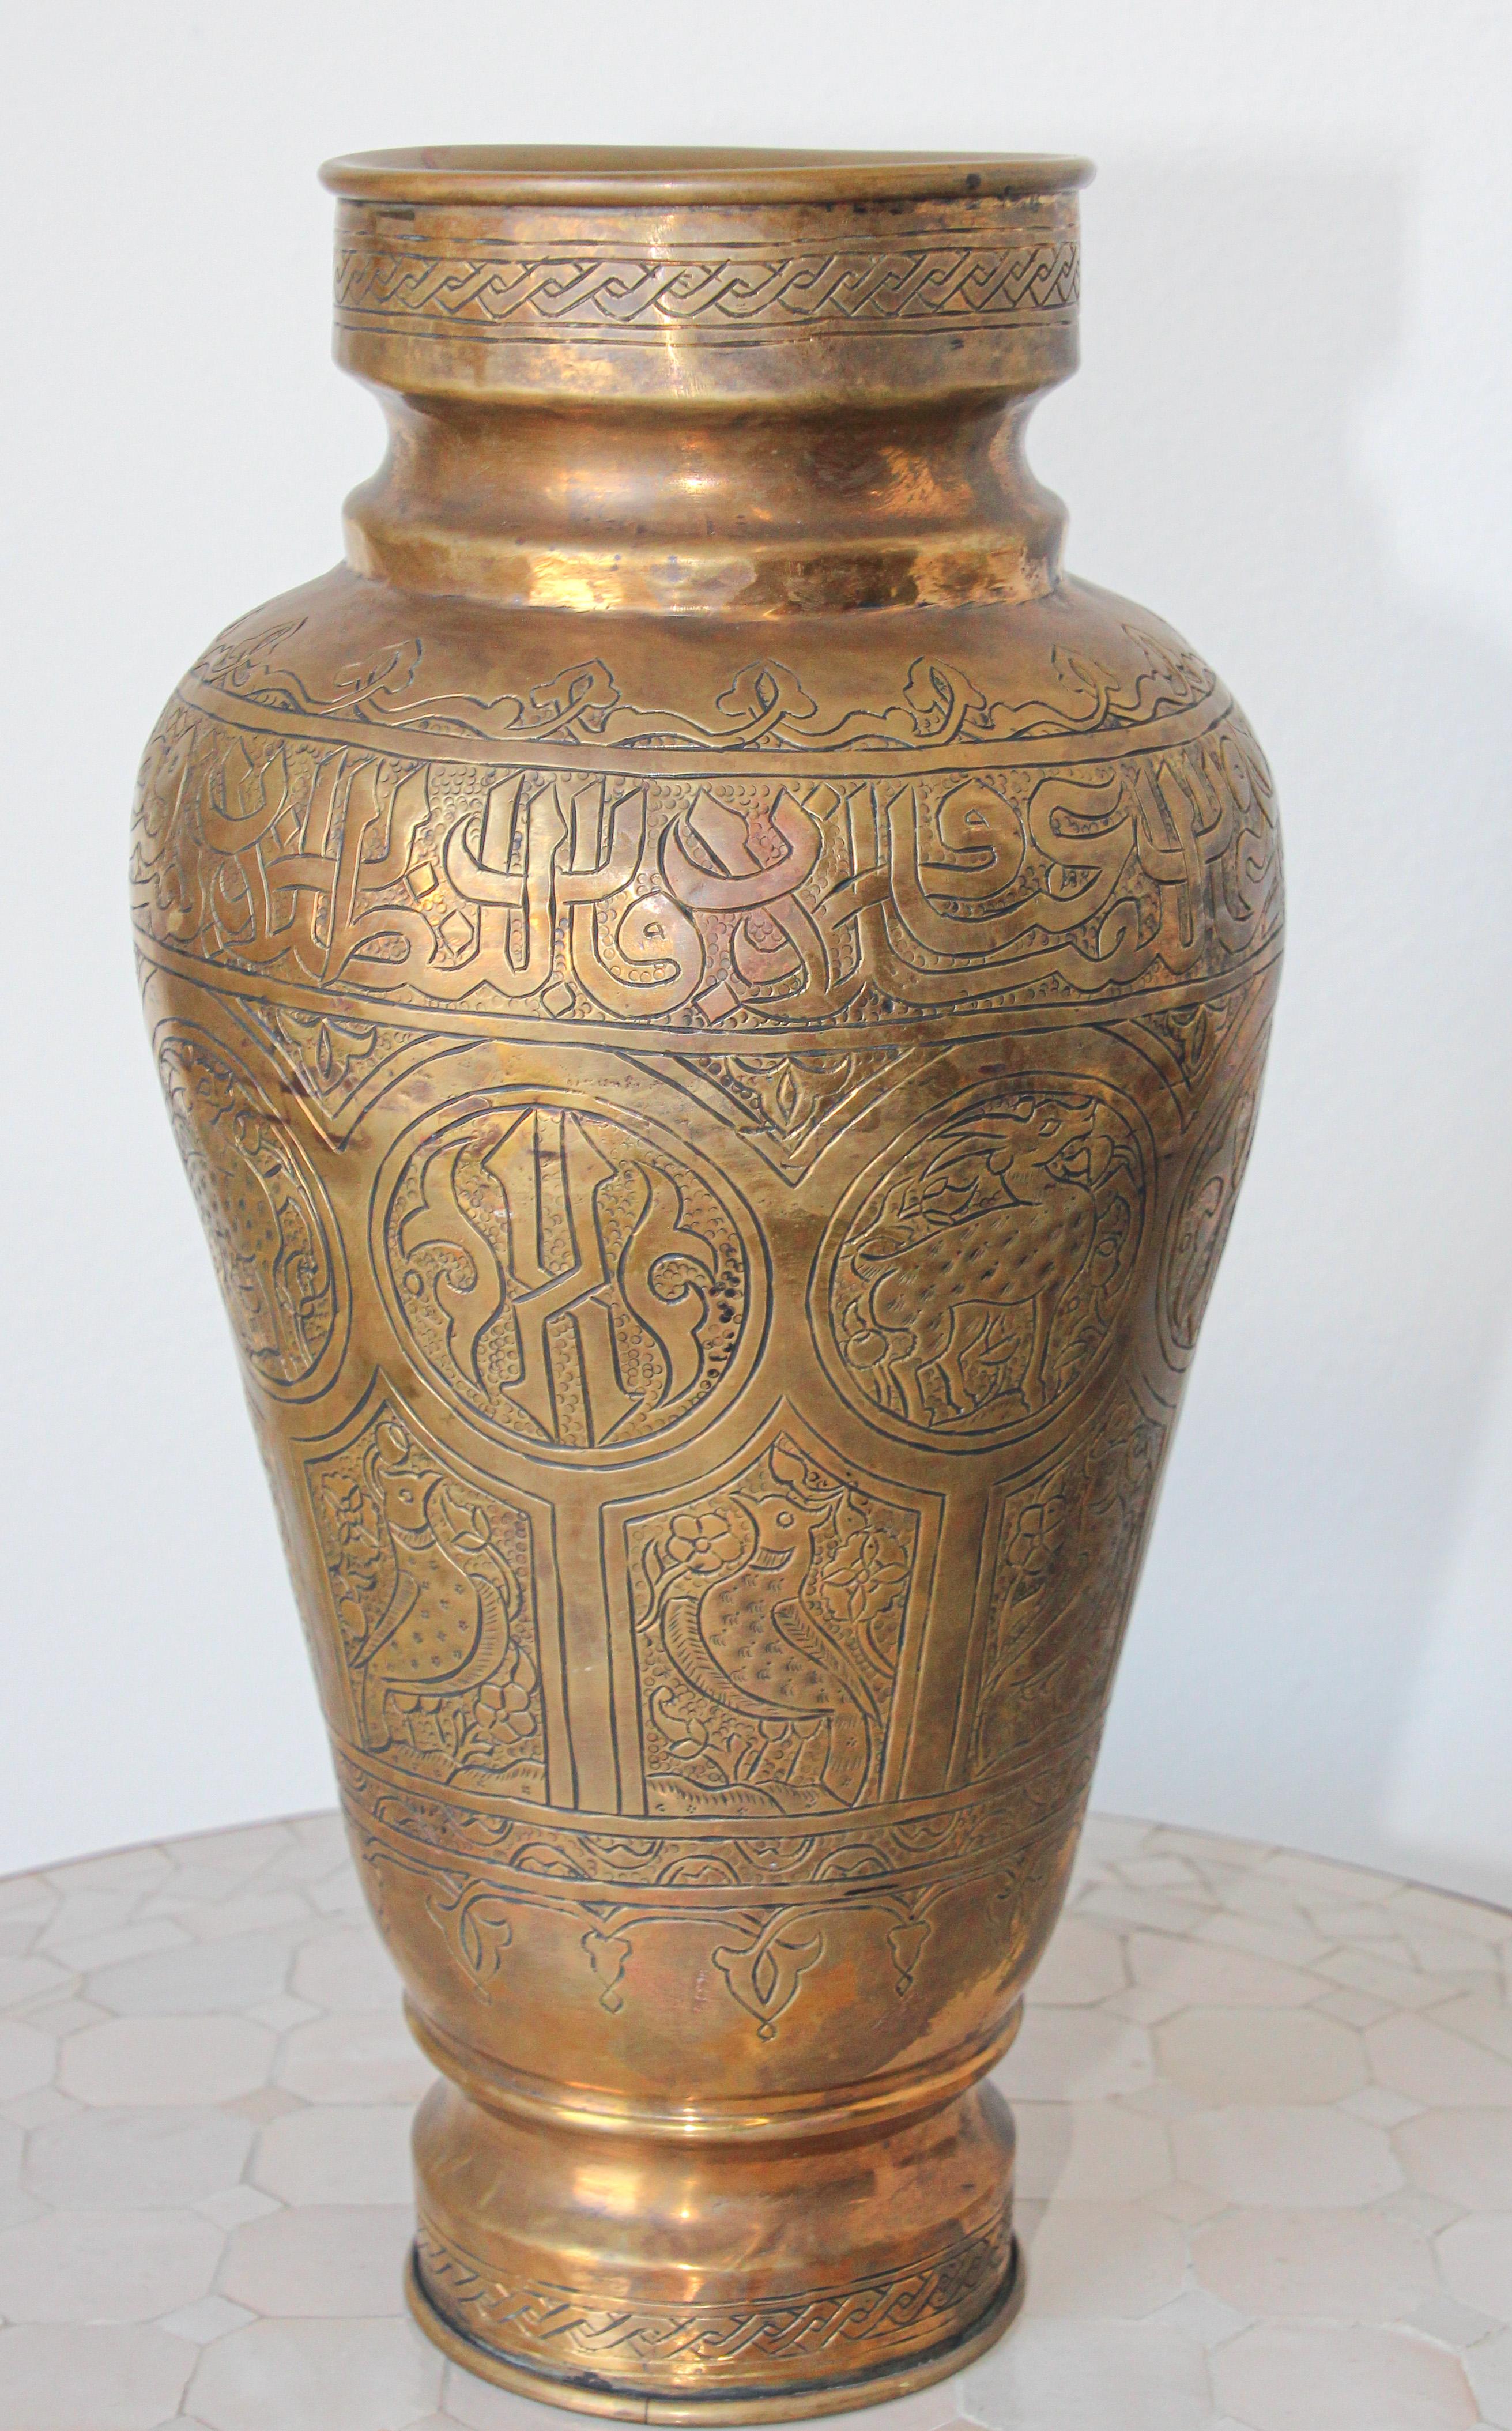 Middle Eastern Islamic brass repoussé vase, finely hand-etched, engraved, hammered and chased with elaborate Moorish Syrian designs decorated with medallions of Arabic calligraphy inscriptions and geometric designs and medallions with